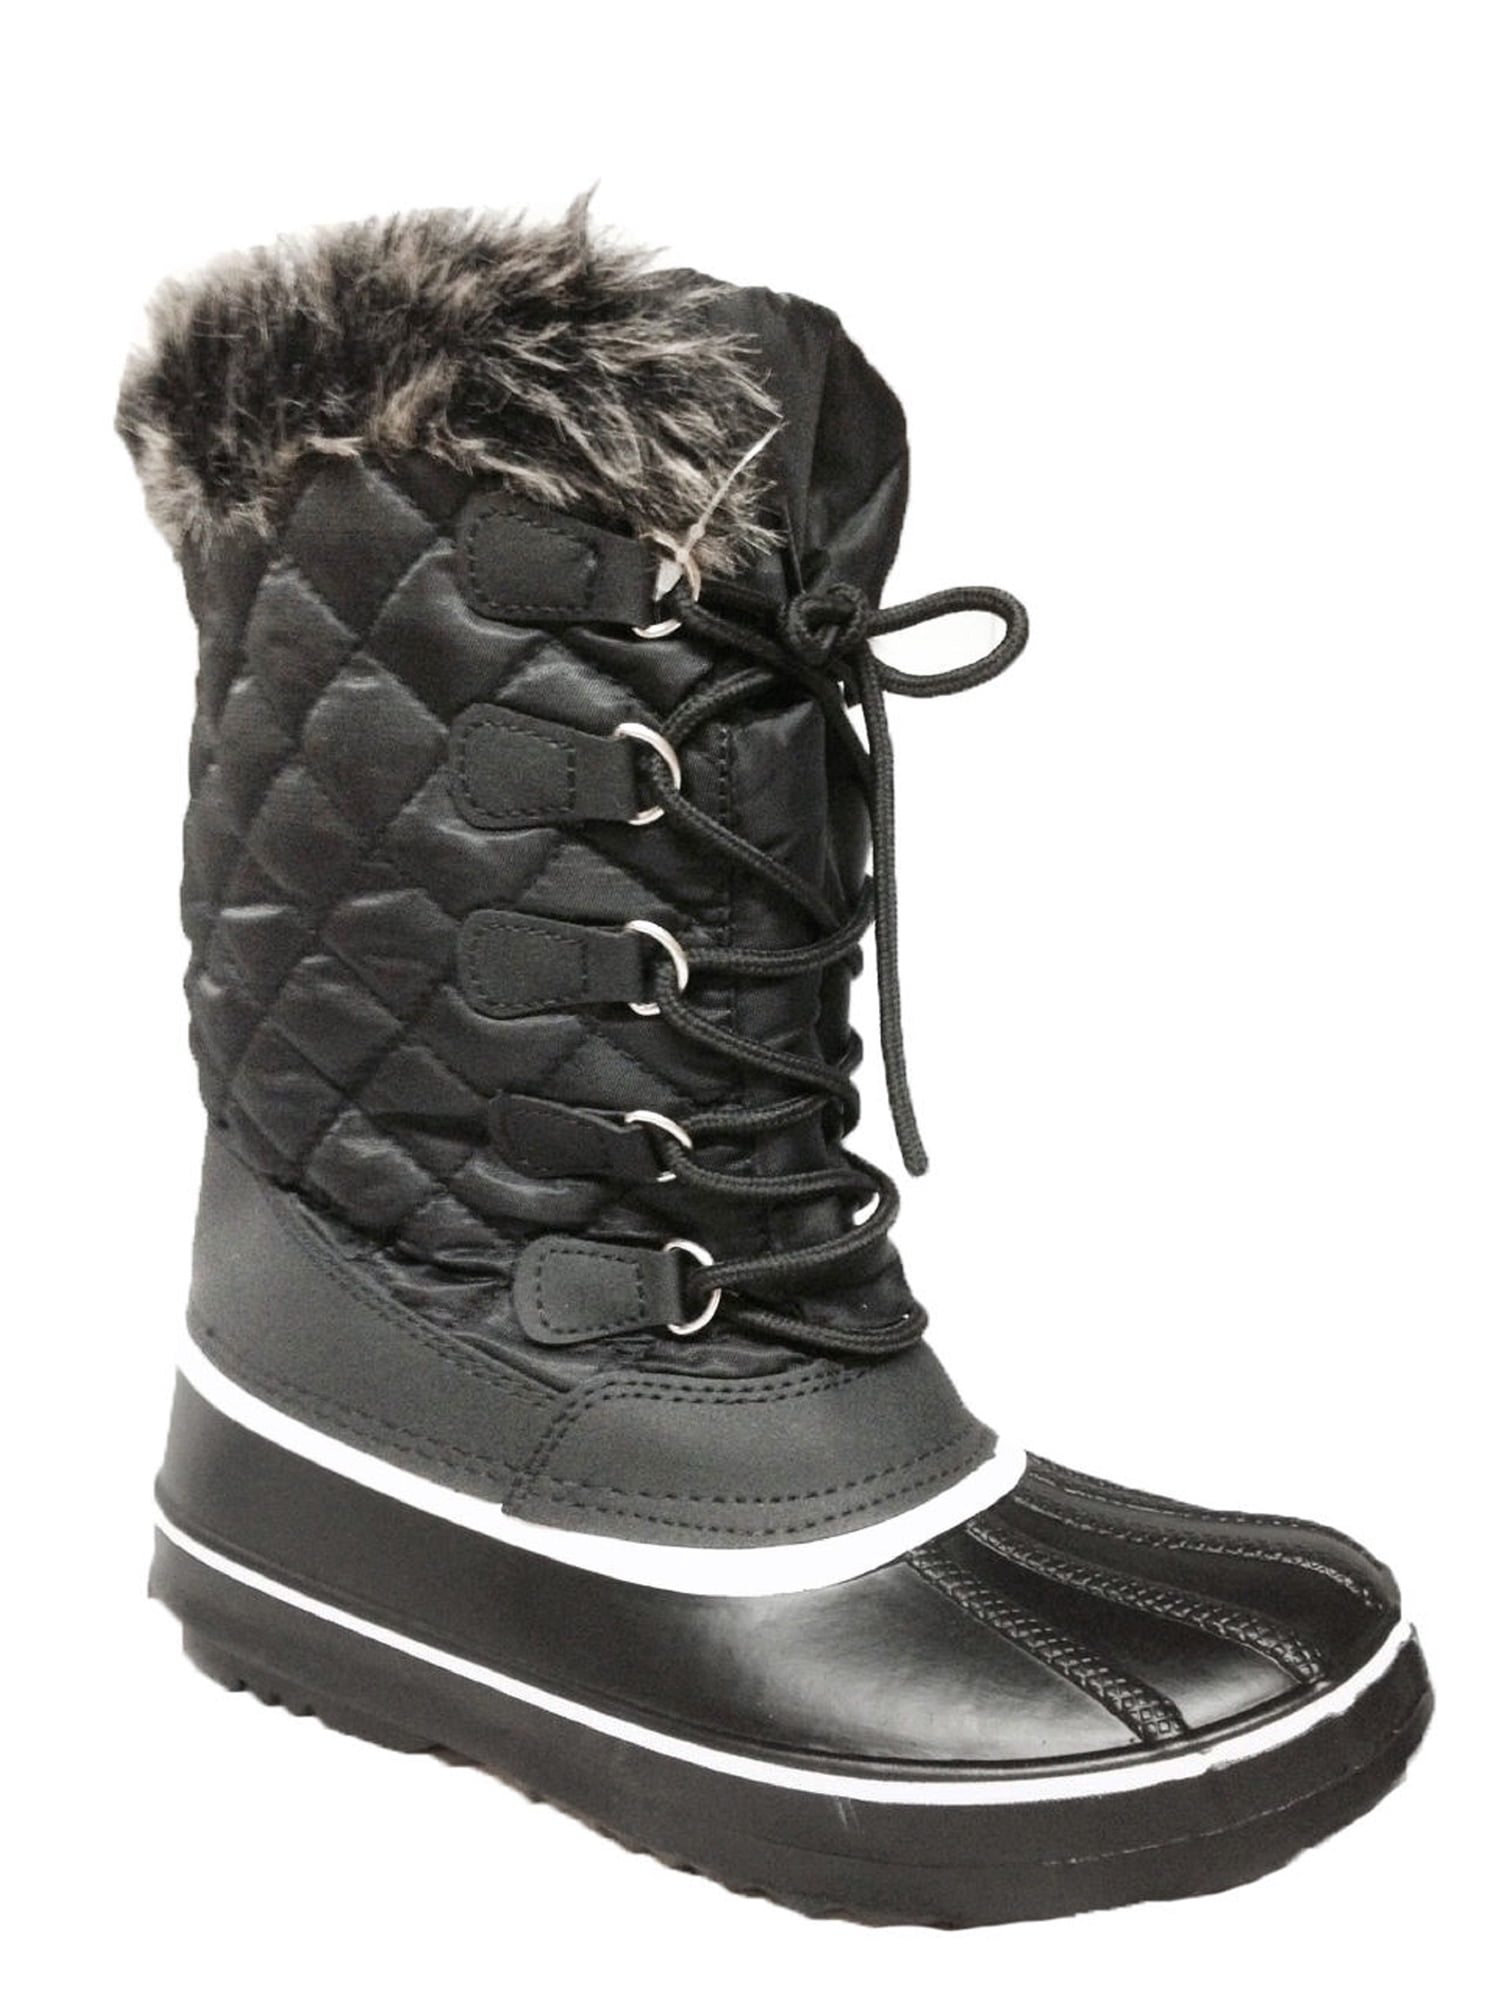 Womens Boots Waterproof Warm Snow Boots Fur Lined Ladies Foldable Mid Calf Shoes 